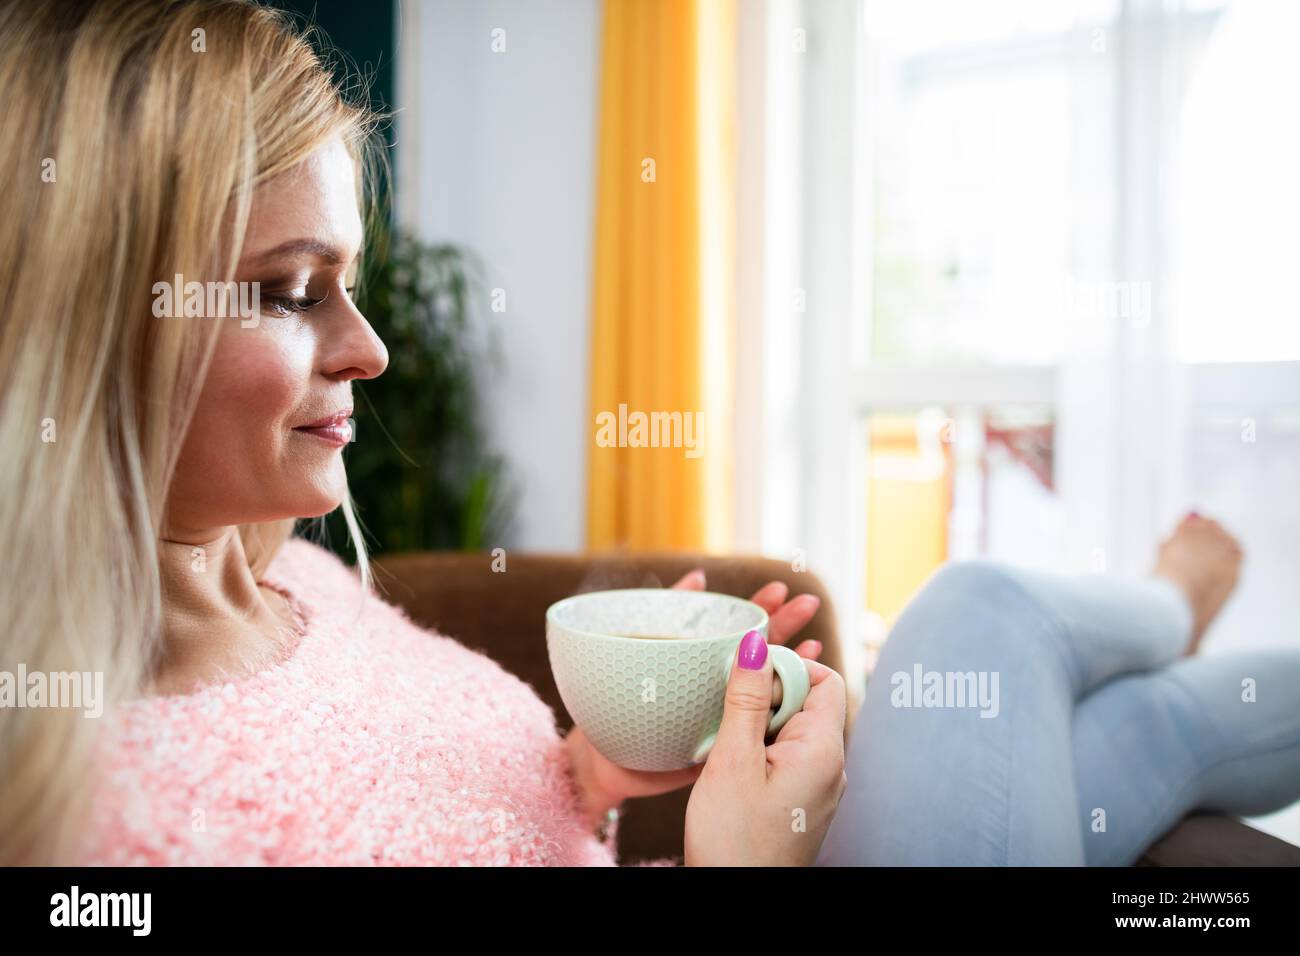 A blonde woman holds a cup of coffee while sitting in a chair. Stock Photo